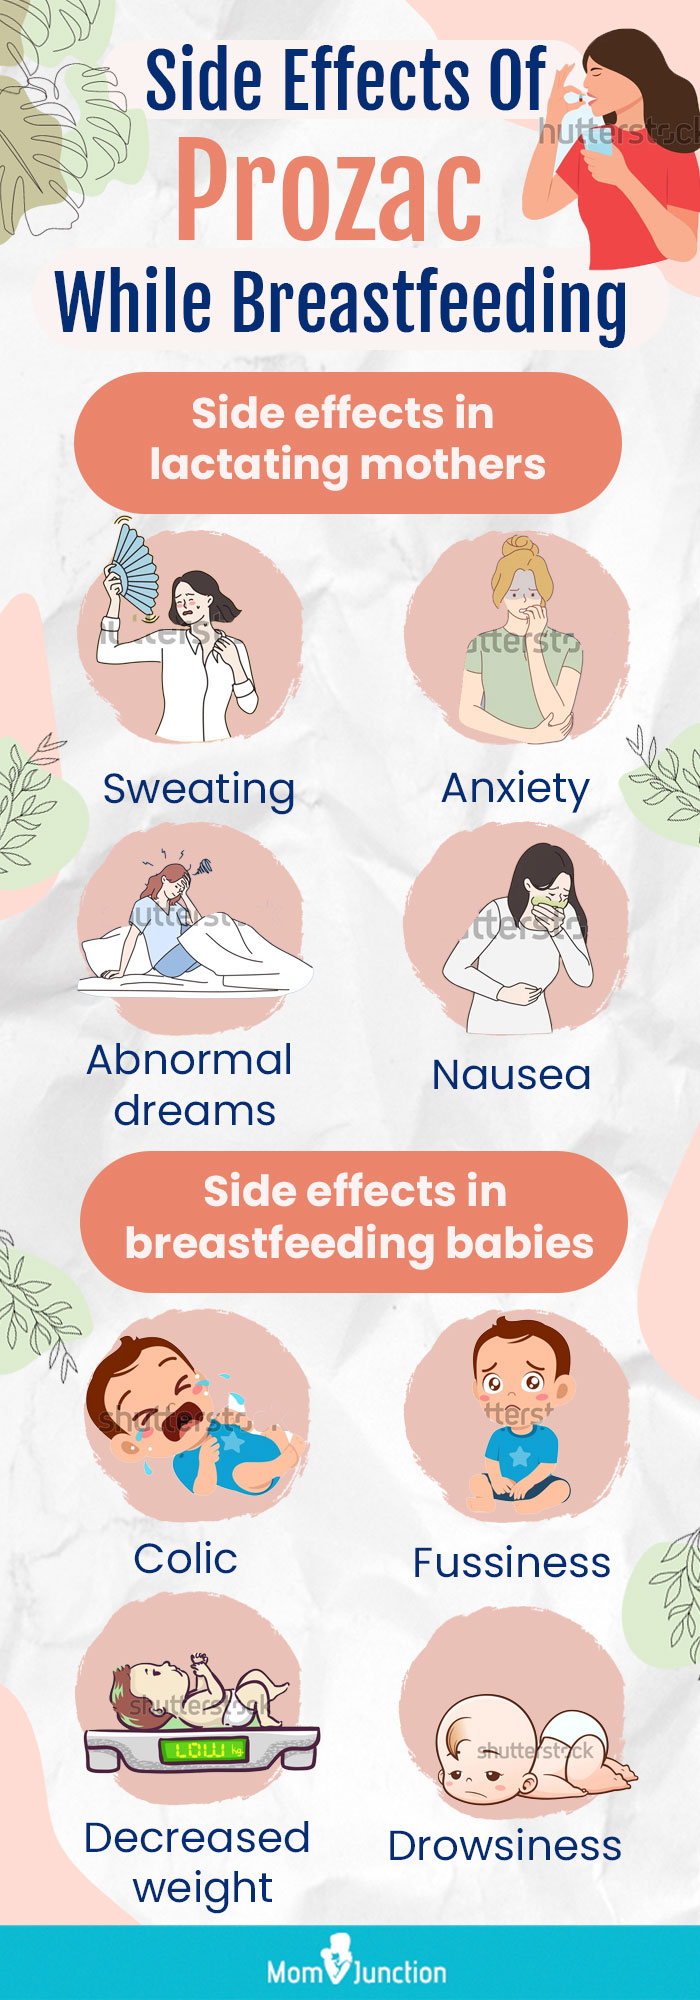 side effects of prozac while breastfeeding [infographic]